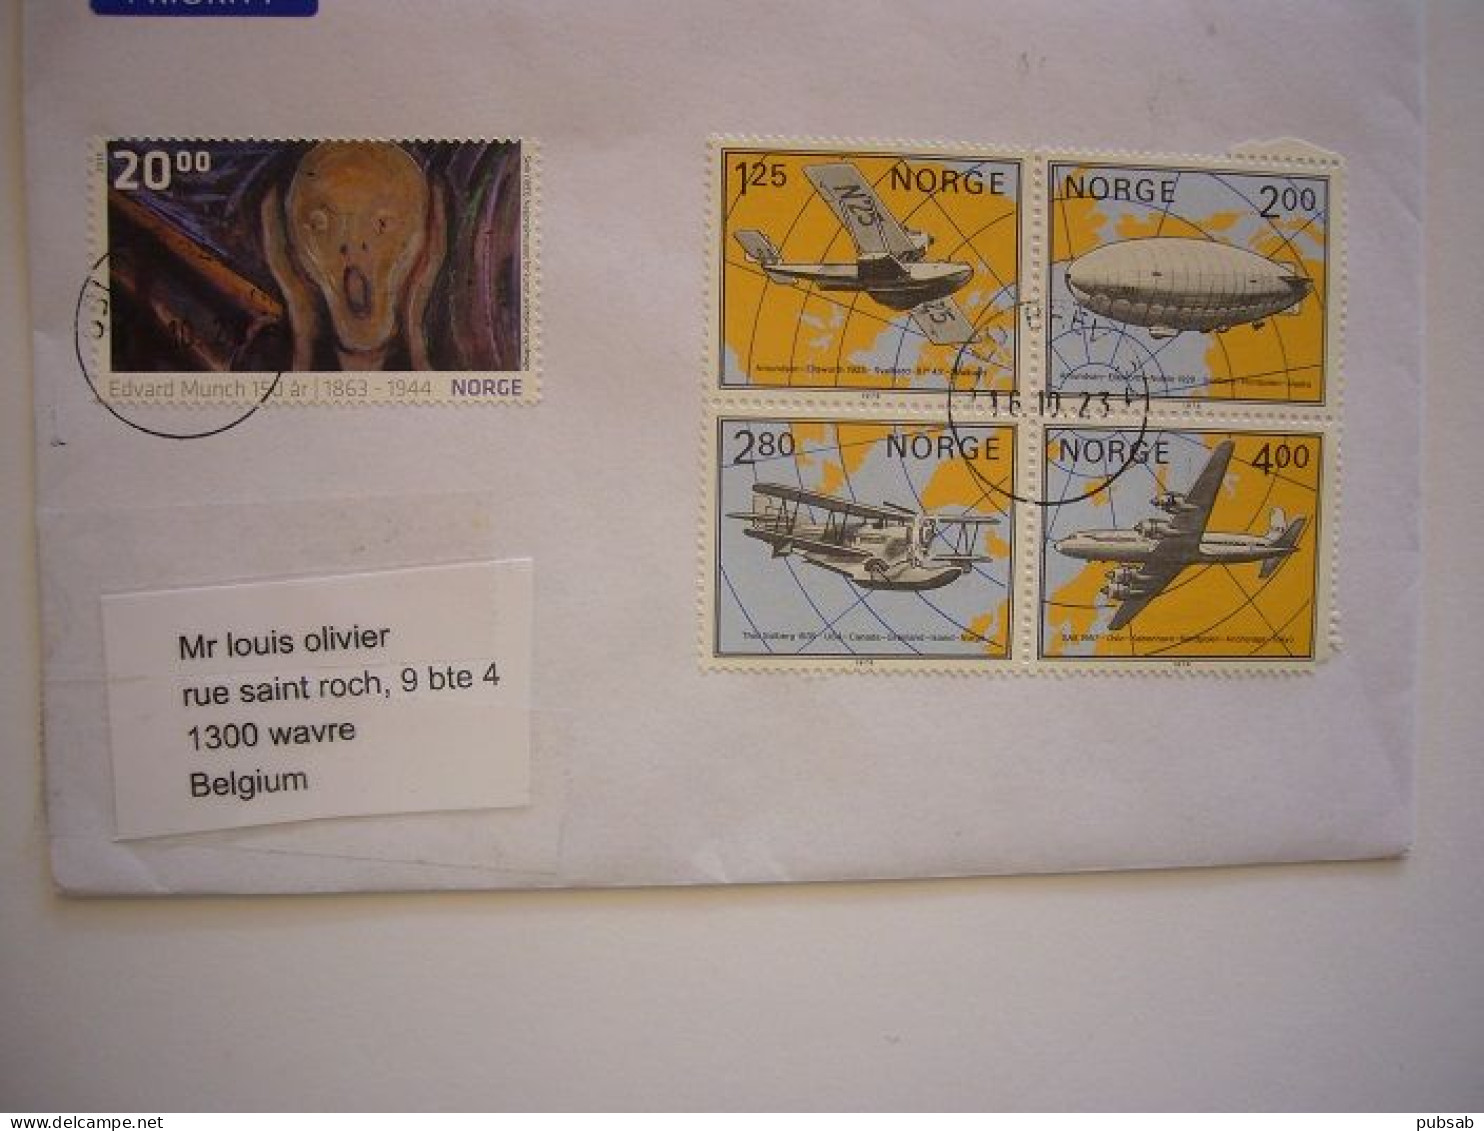 Avion / Airplane / NORGE / Letter From Rolvsoy, Fredrikstad To Wavre, Belgium / Airline Stamps - Storia Postale